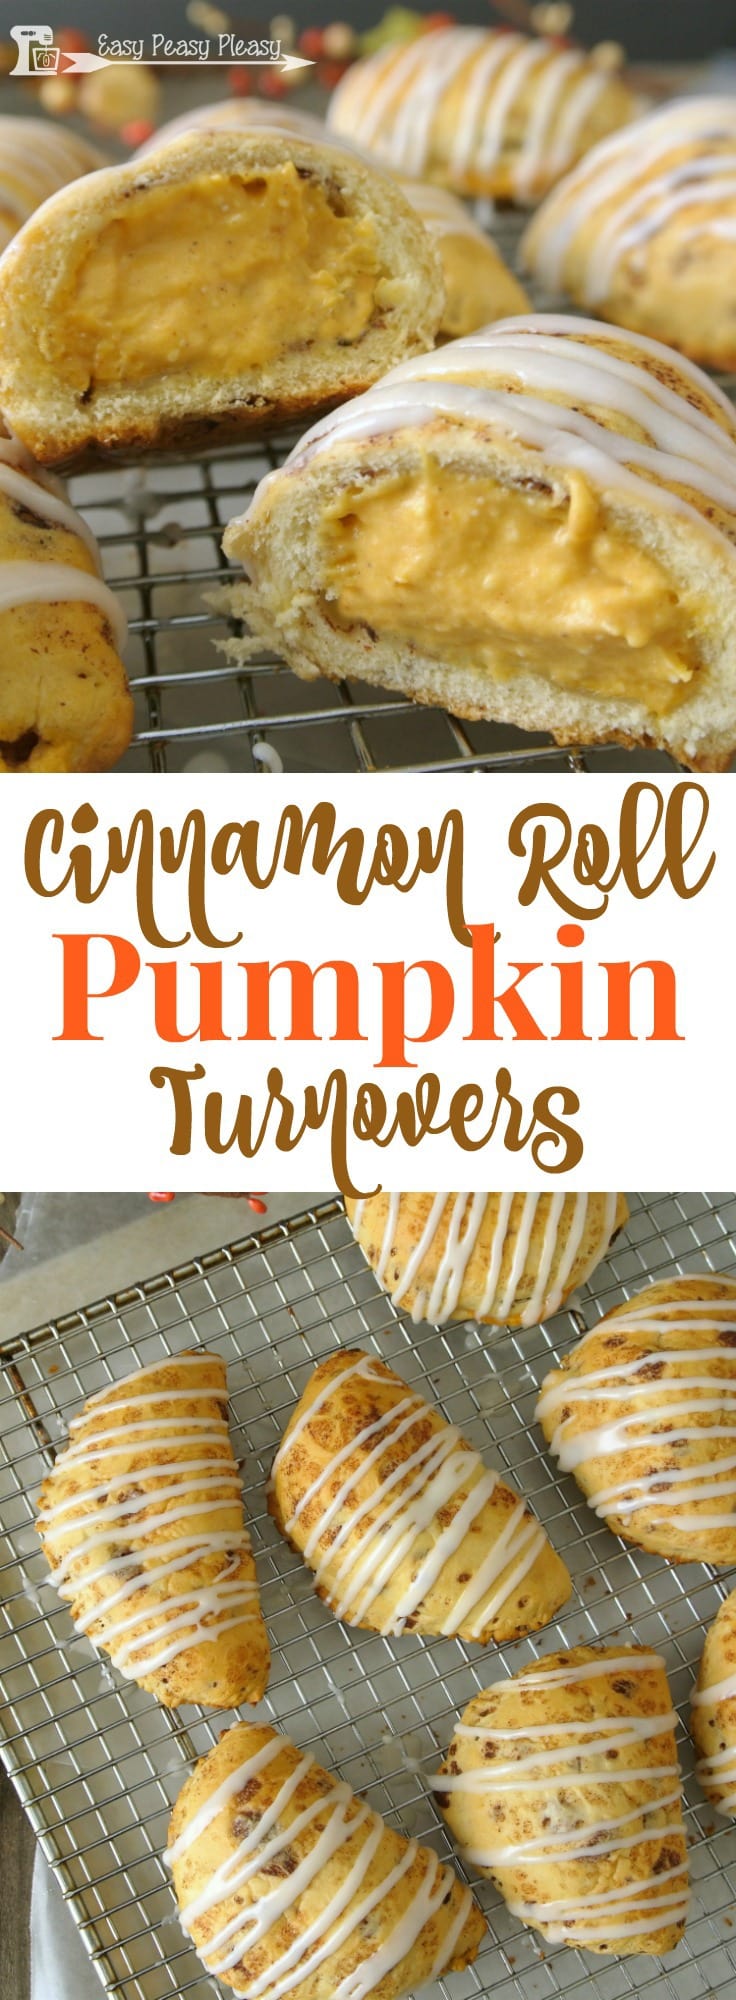 Easy 5 Ingredient Cinnamon Roll Pumpkin Turnovers are delicious with the help of canned cinnamon rolls.